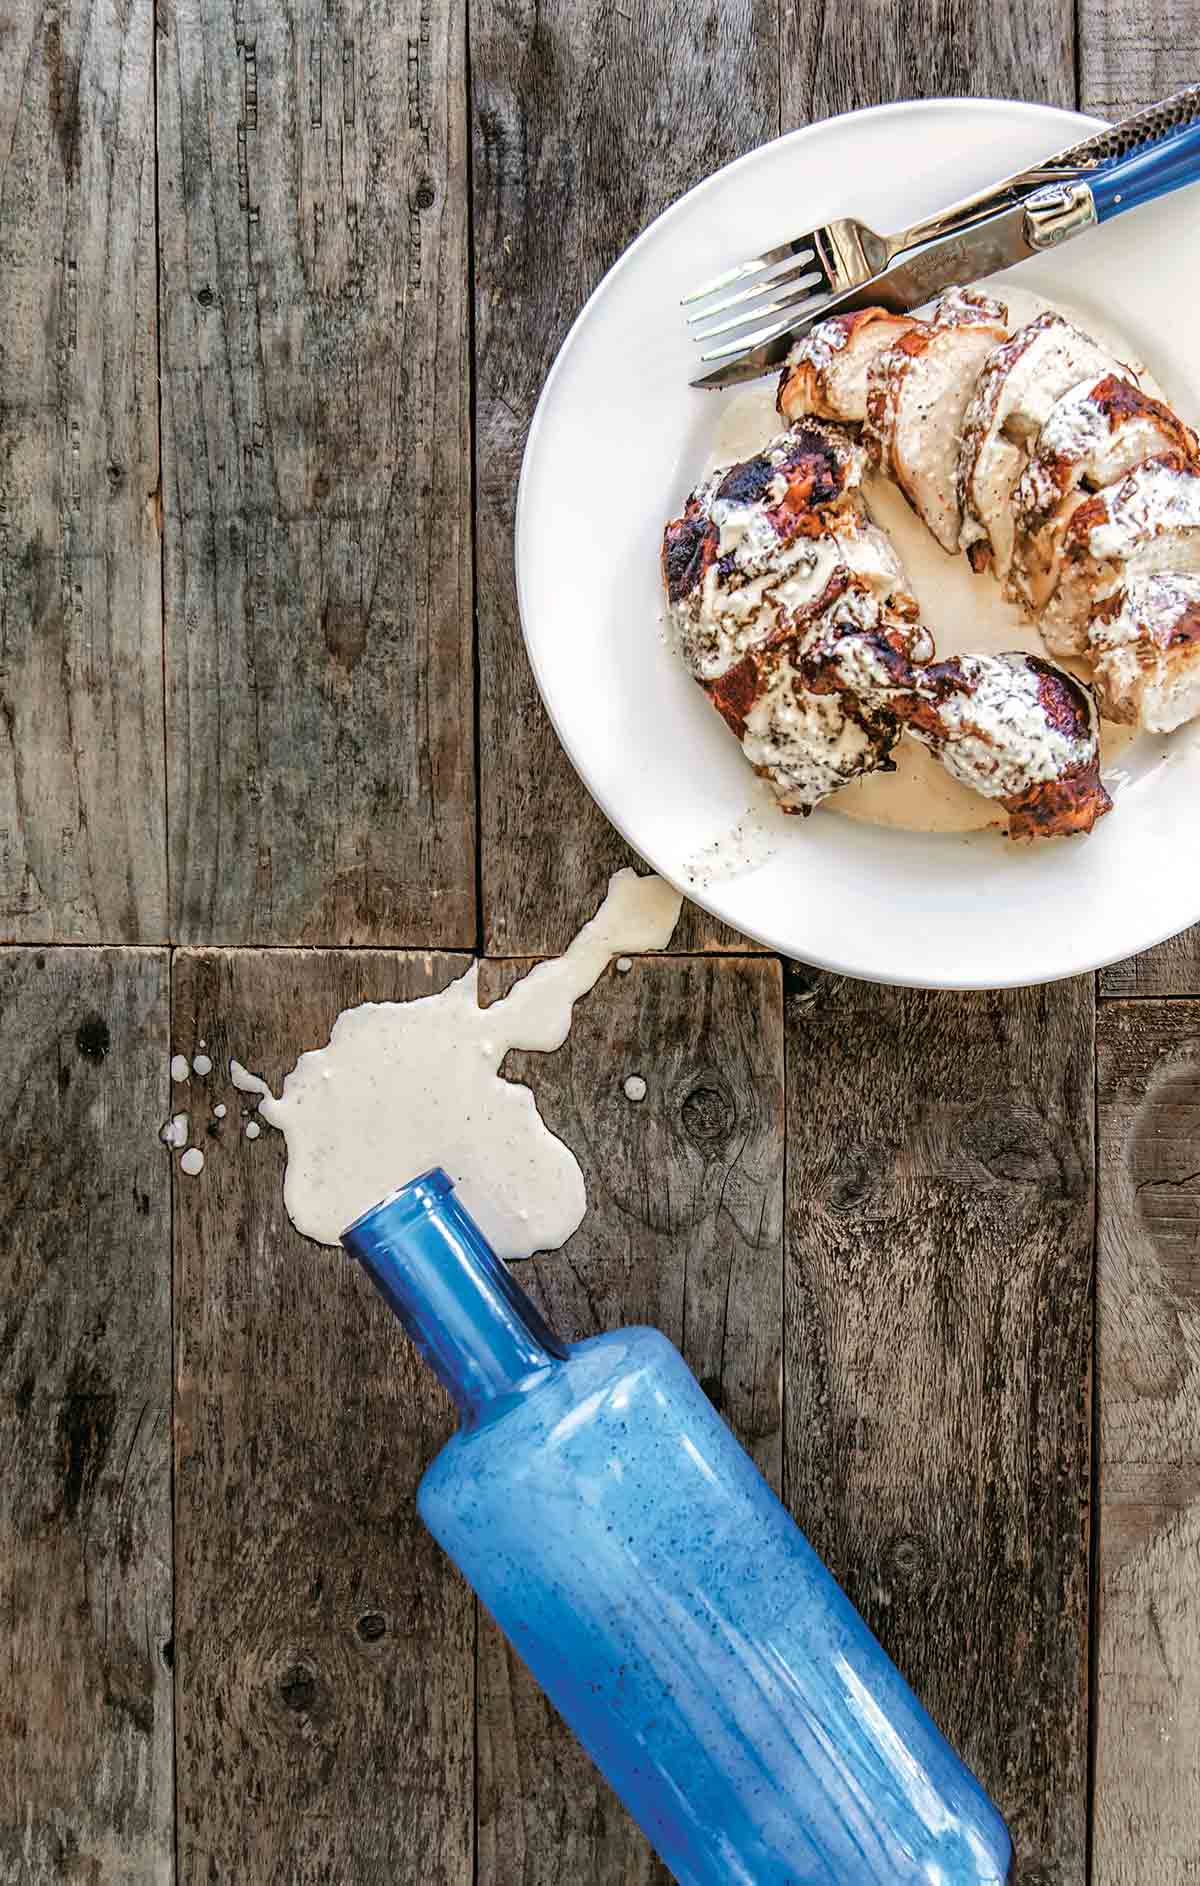 A blue bottle of Alabama white bbq sauce spilled on a wooden table with a plate of grilled chicken covered in white bbq sauce beside it.